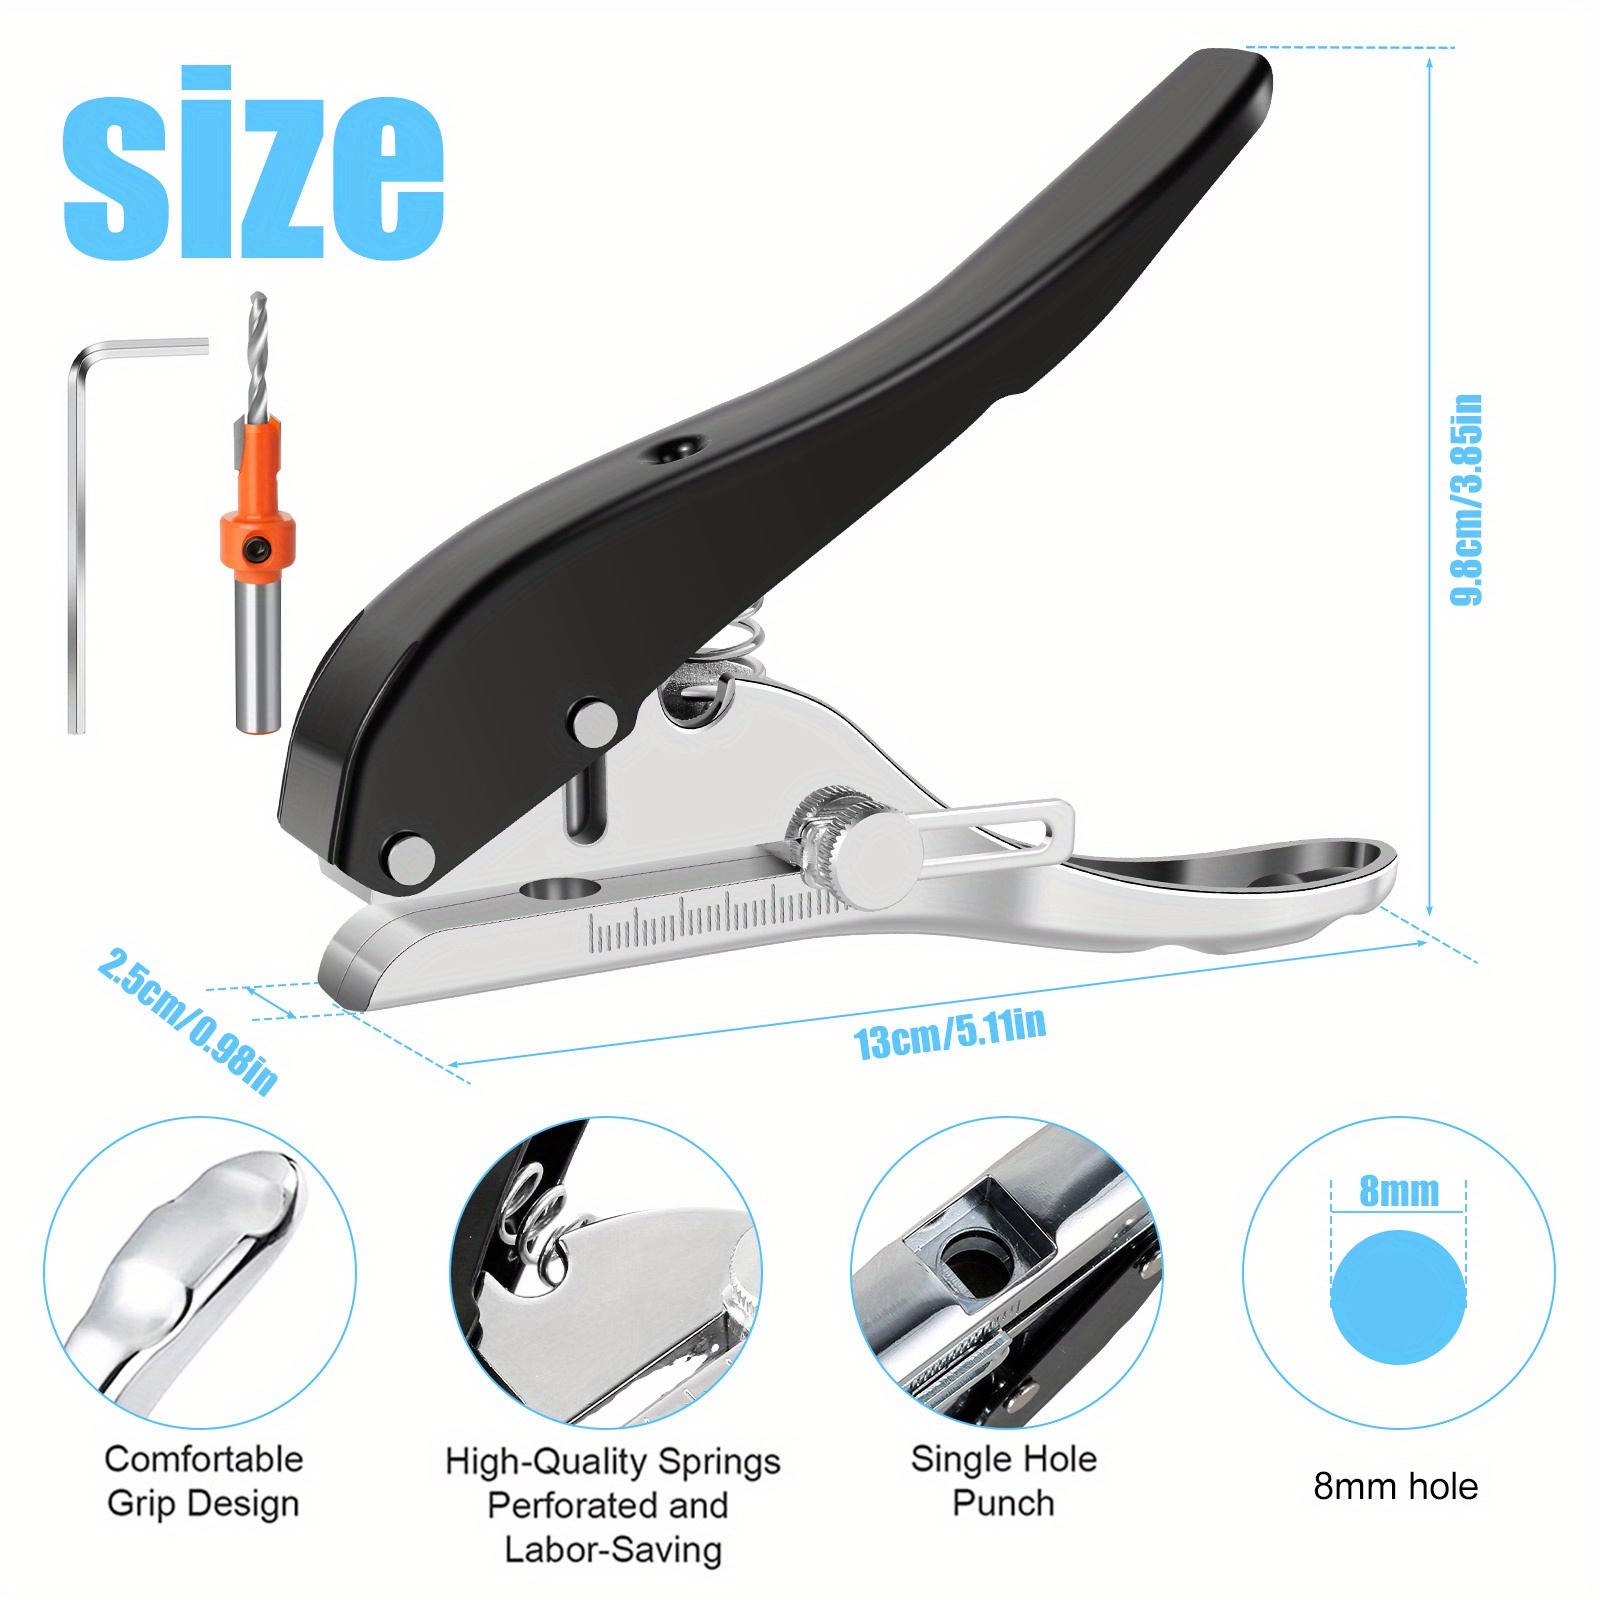 Threns Single Hole Punch 3/8inch Heavy Duty Hole Puncher Portable Paper Punch Handheld Long Hole Punch Metal Hole Punch Tool for Paper Cards Plastic